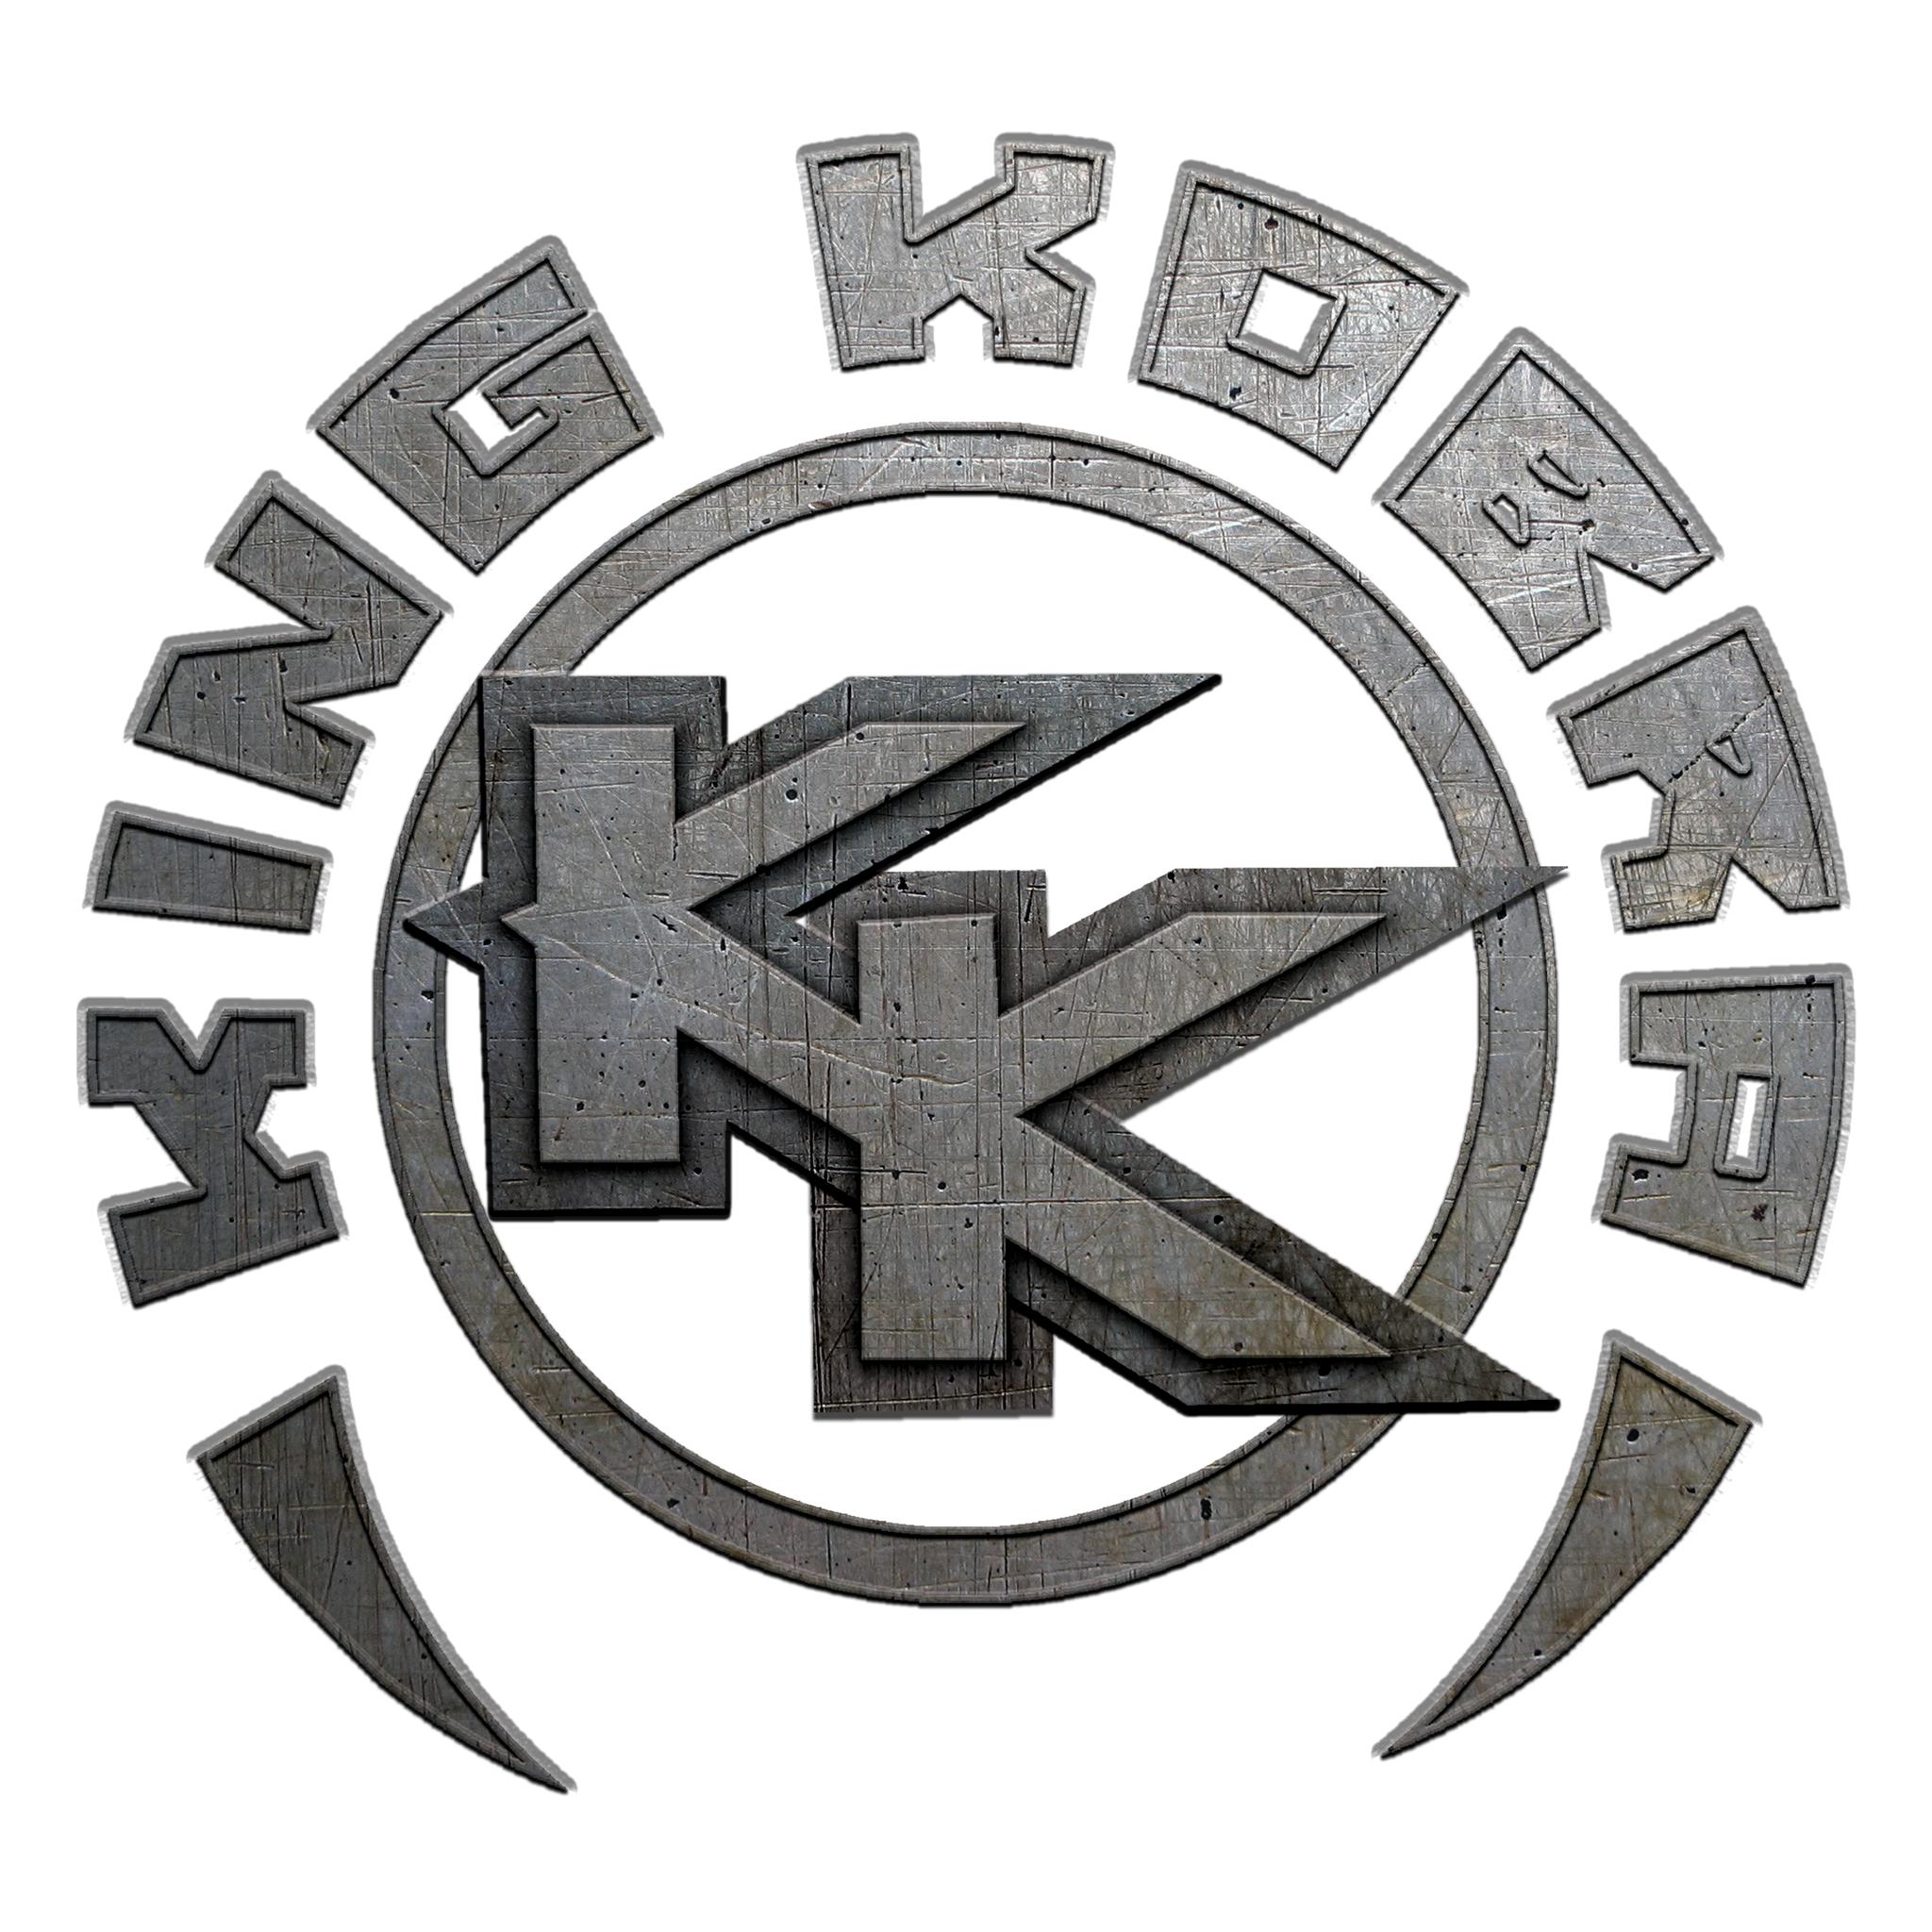 King Kobra Returns With Brand New Album “We Are Warriors” and All-Star Lineup!